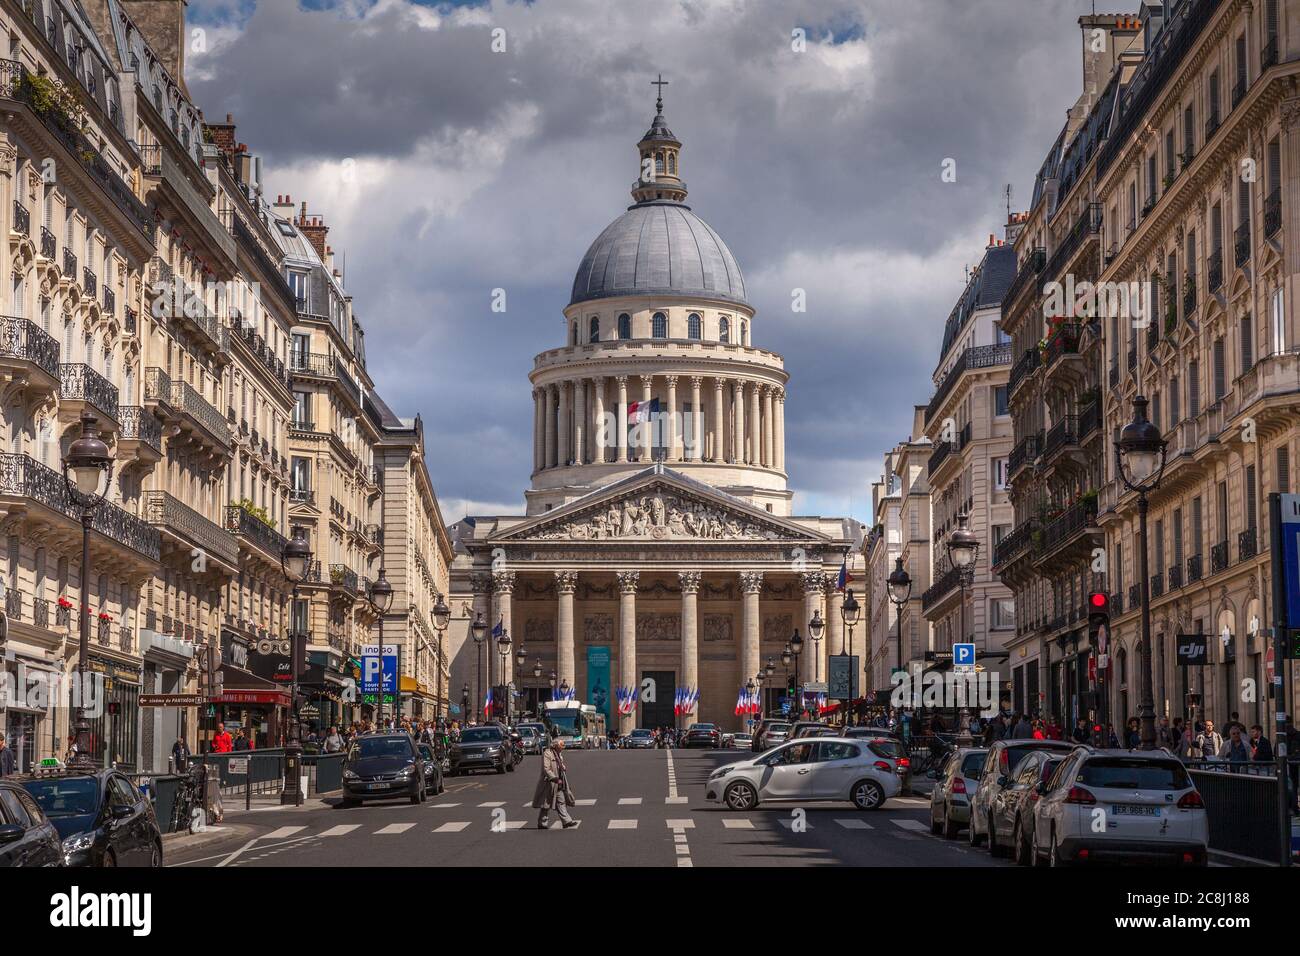 Looking down a street in Paris, France towards the Pantheon Stock Photo